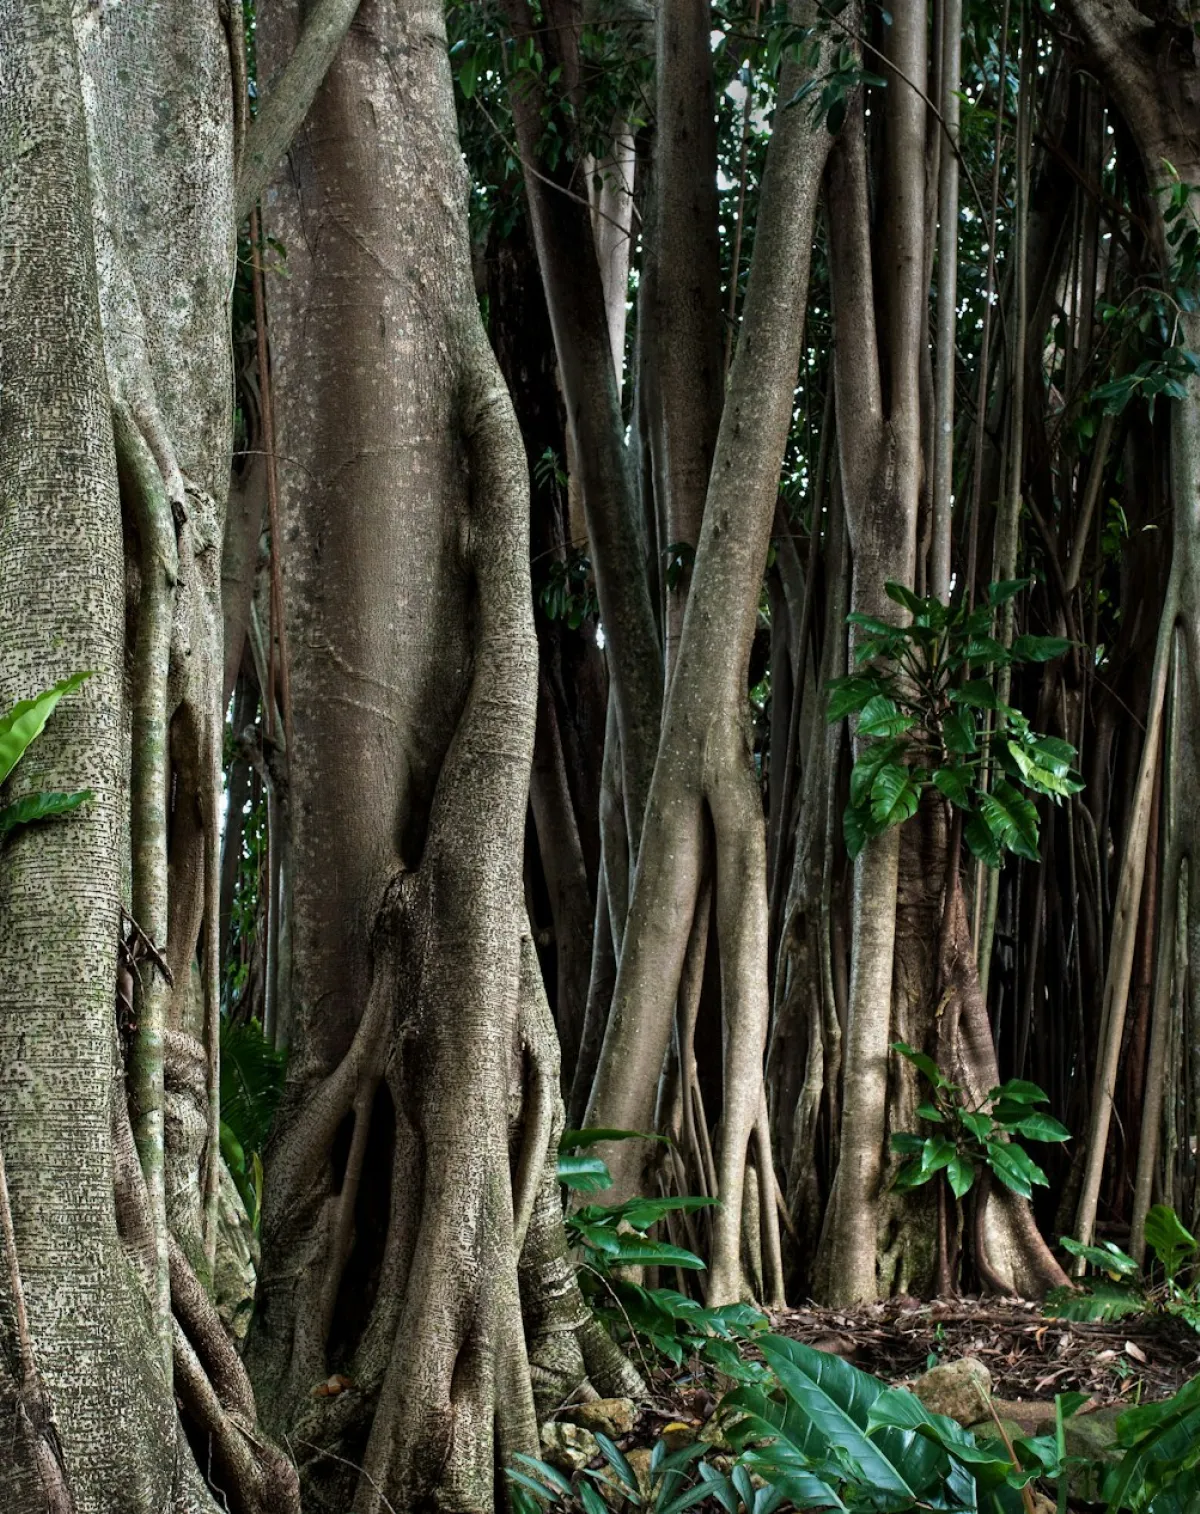 Rubber trees in a forest